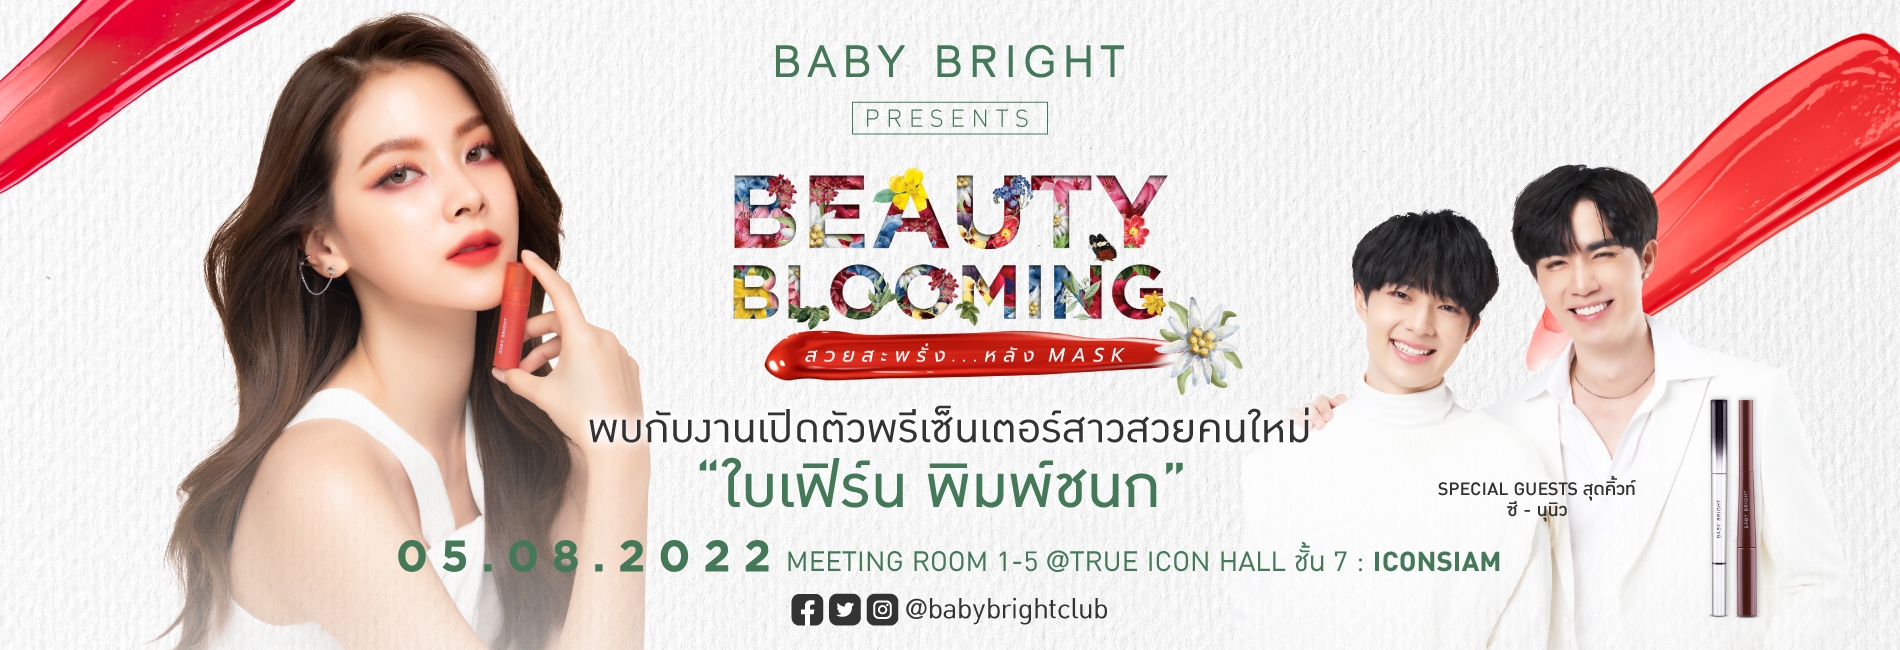 BABY BRIGHT BEAUTY BLOOMING